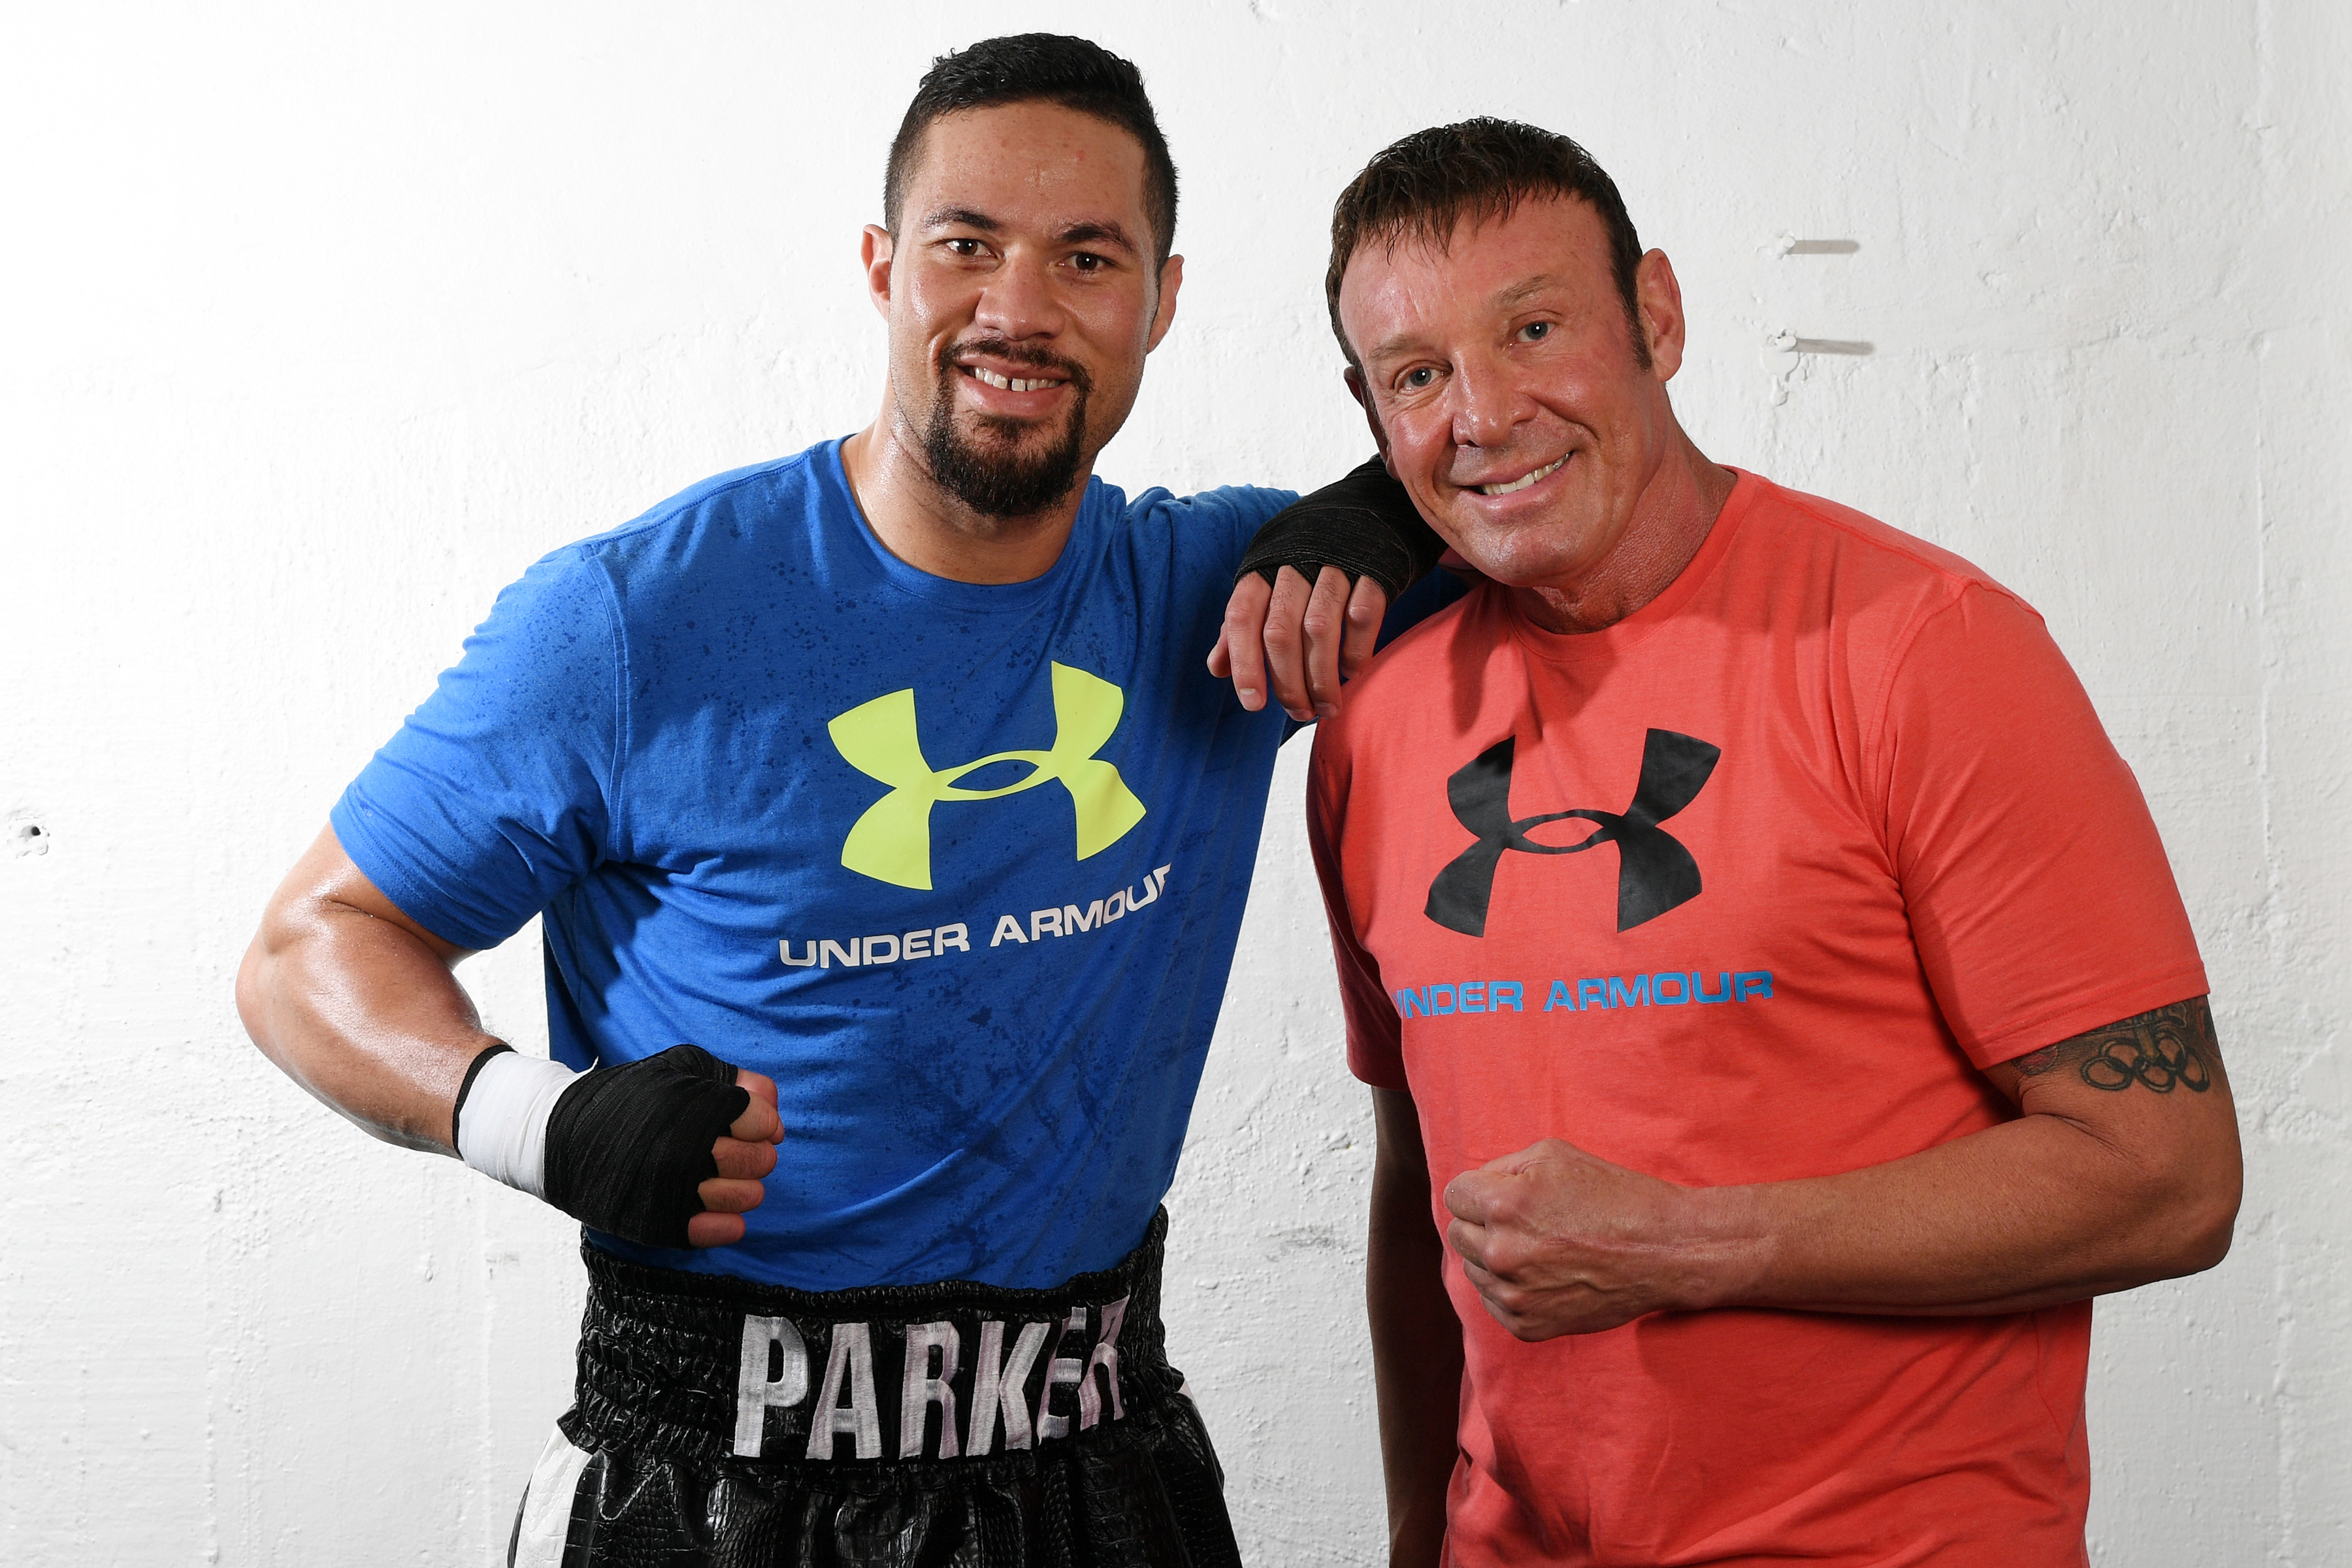 New Zealander and undefeated heavyweight contender Joseph Parker (left) and trainer Kevin Barry during a photoshoot at The Wreckroom, Auckland, New Zealand. Monday, May 9, 2016. Copyright Photo credit: Andrew Cornaga/www.photosport.nz